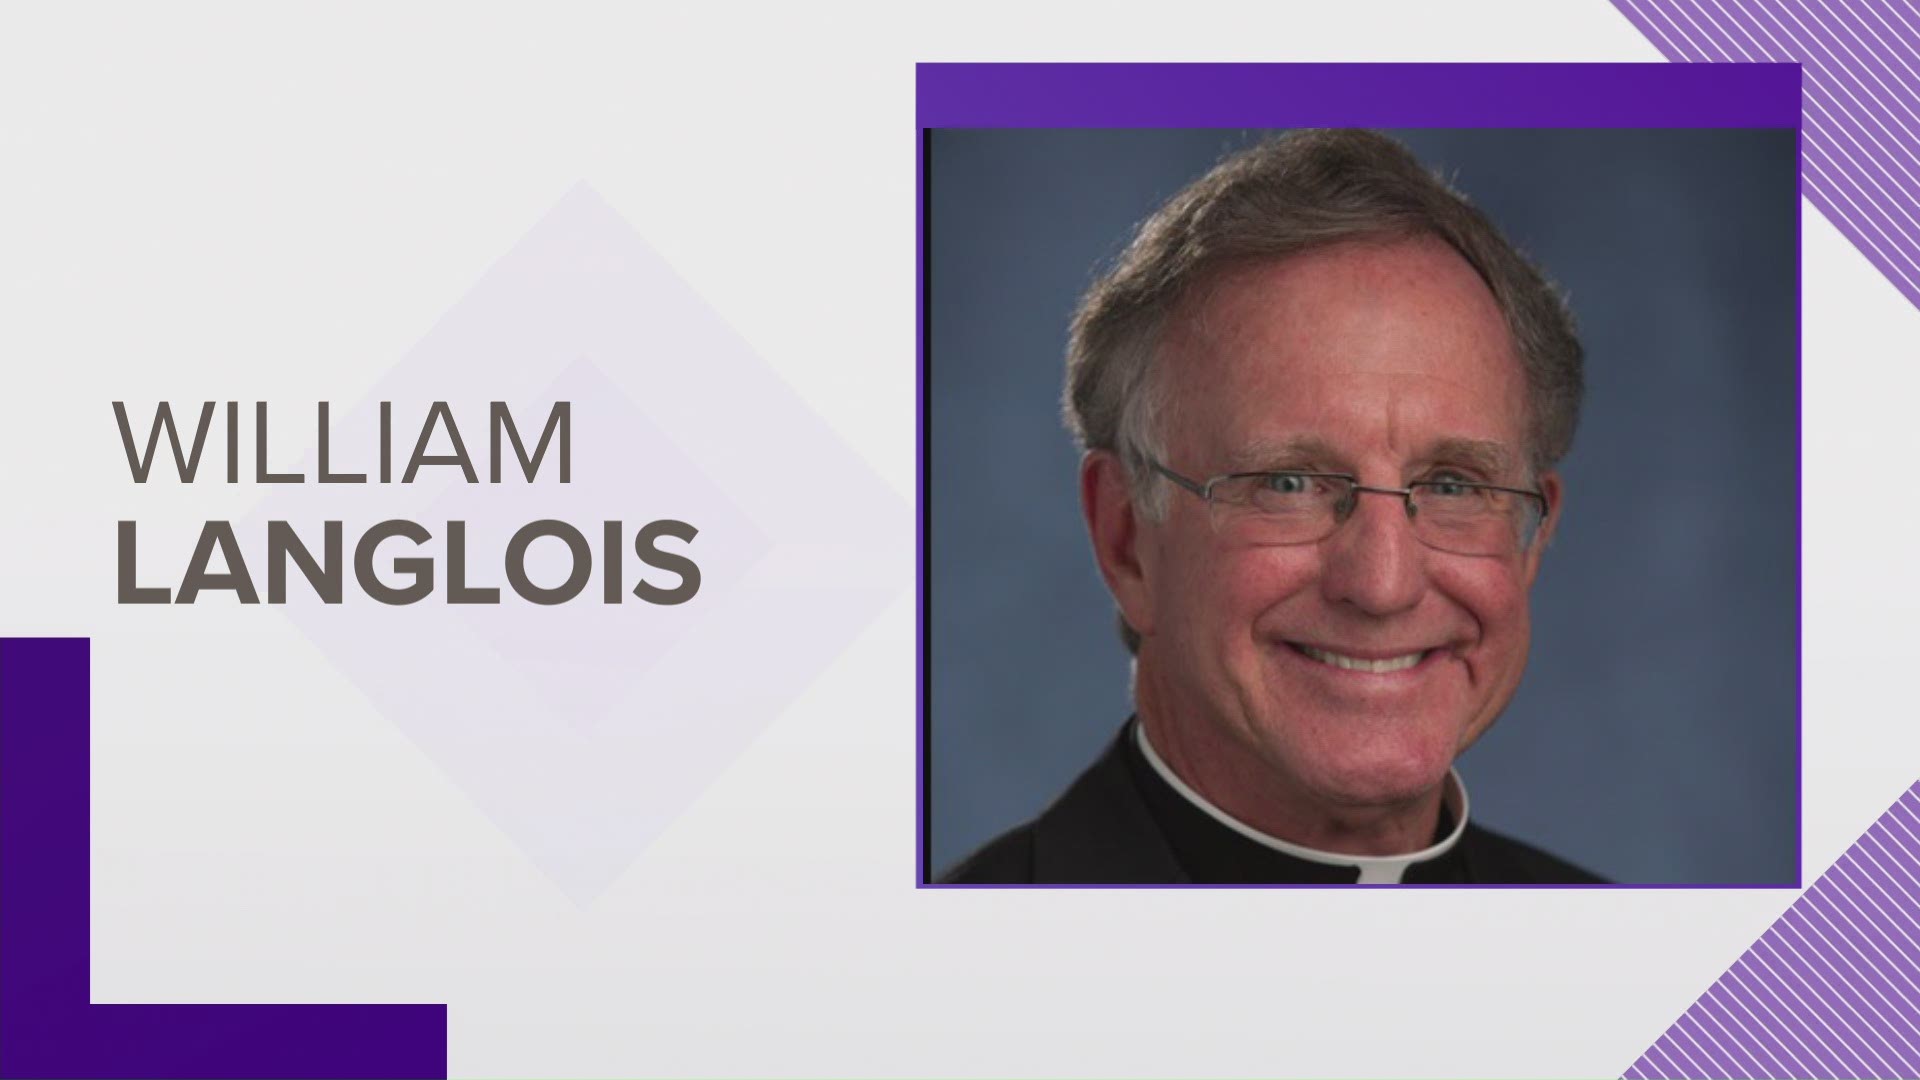 The incidents of sexual abuse that occurred from 1999-2006 happened while Langlois was serving as pastor of St. Patrick - St. Anthony Parish in Grand Haven.